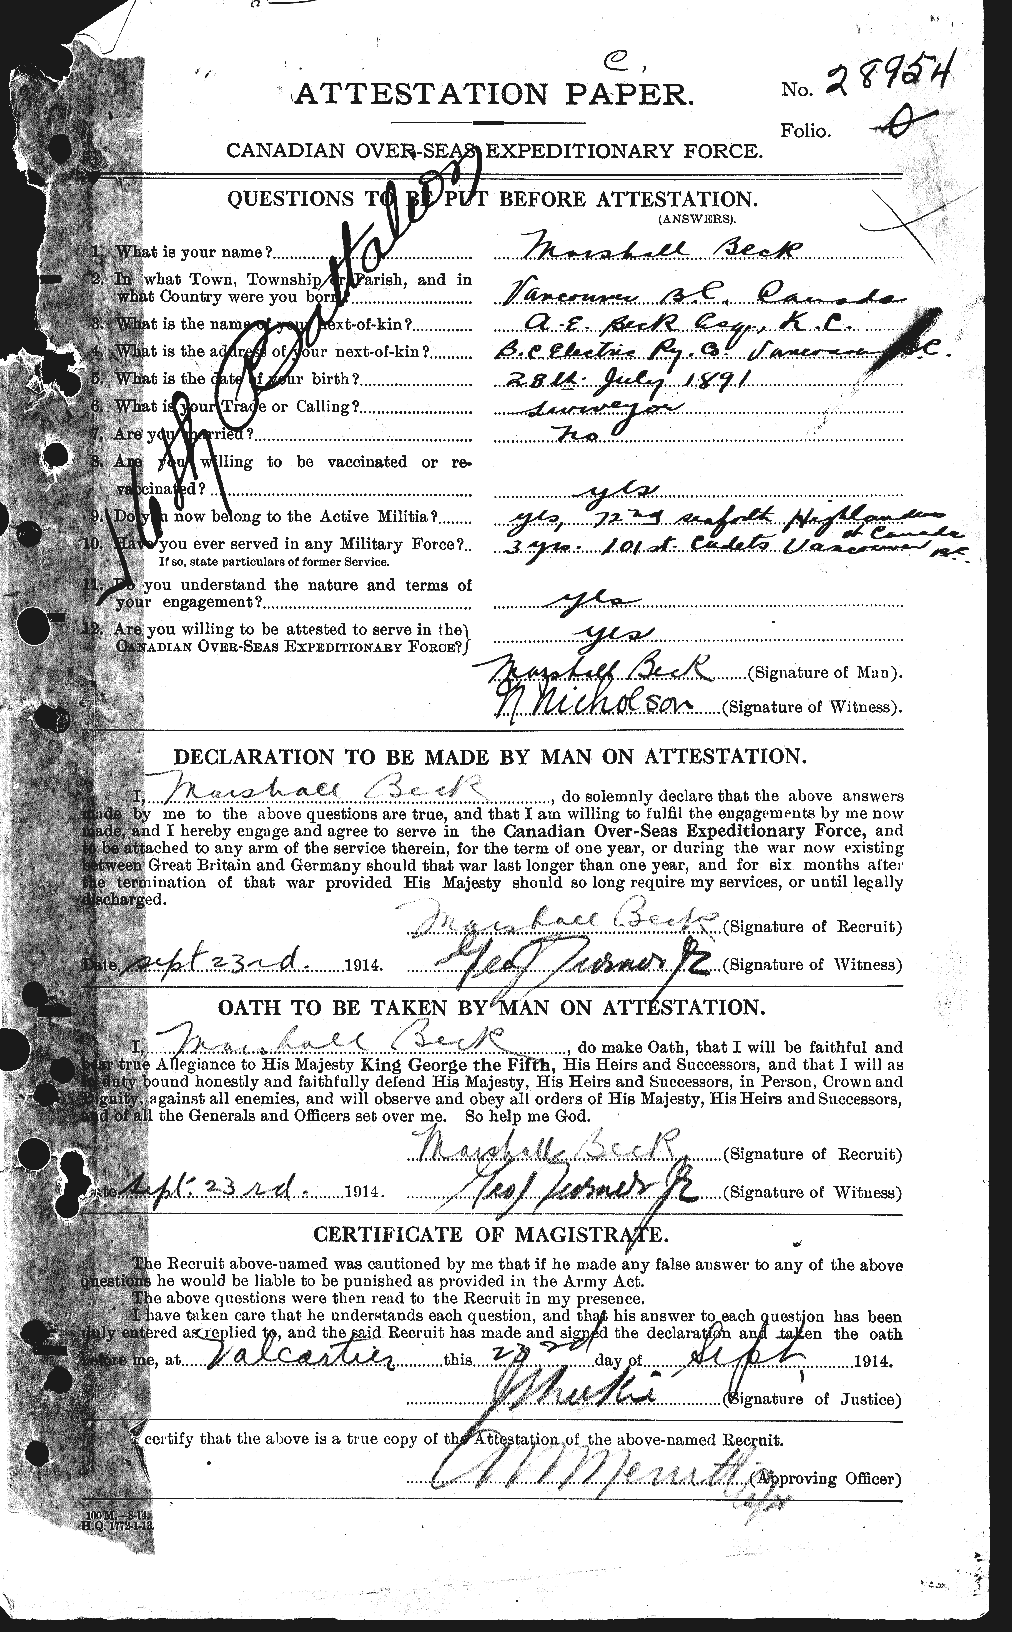 Personnel Records of the First World War - CEF 232196a